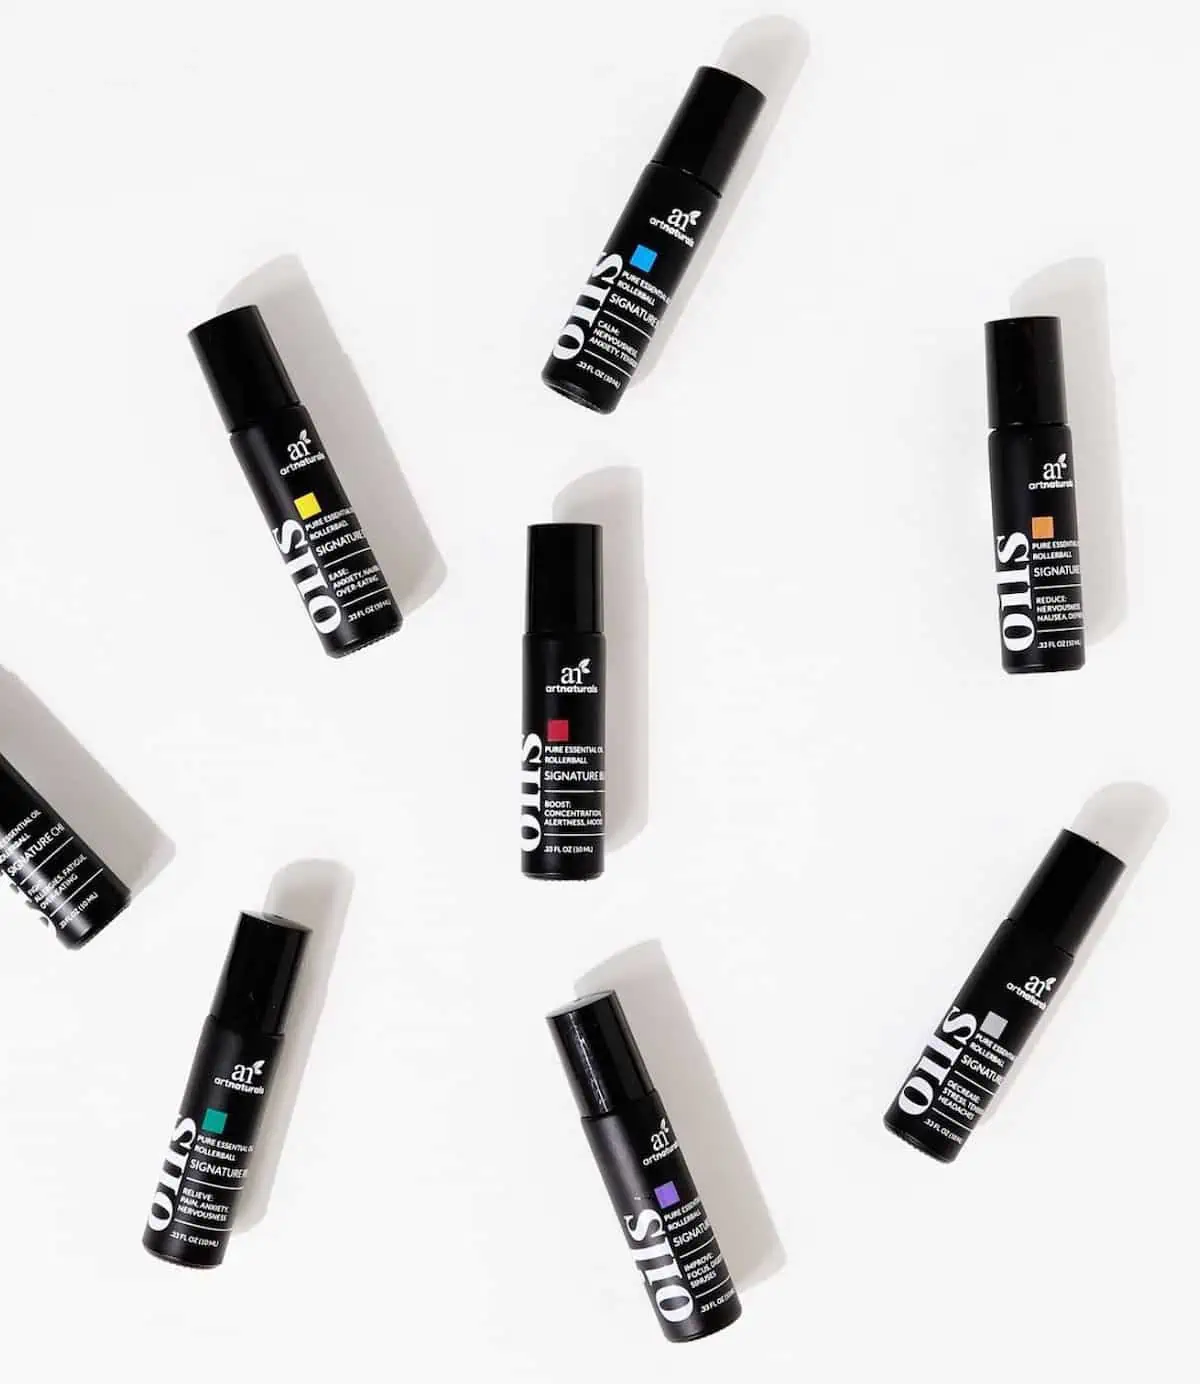 Essential oils roll-on applicators against a white background.